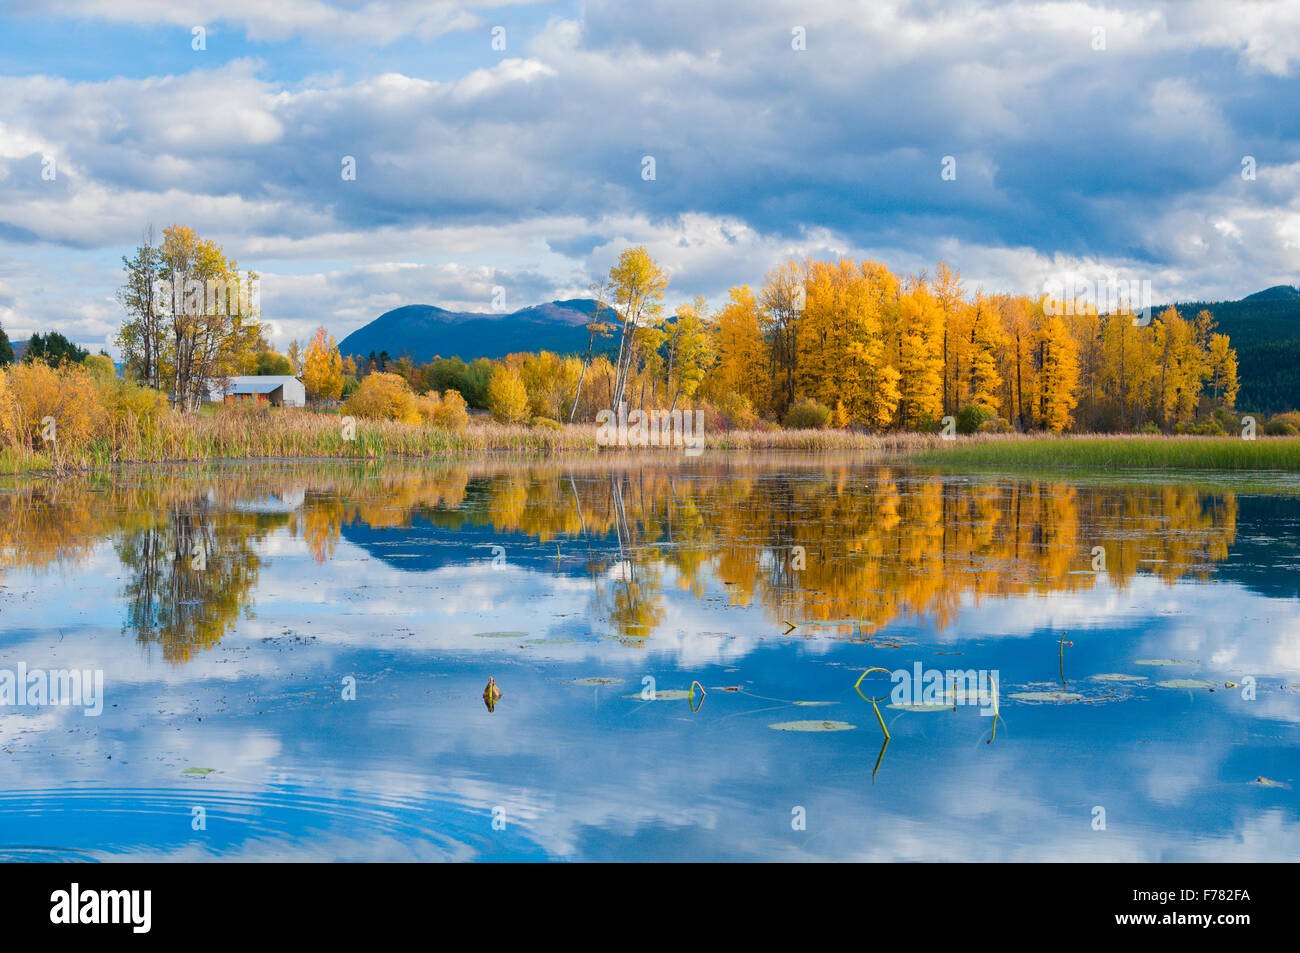 Fall in the Columbia Valley wetlands, British Columbia, Canada Stock Photo